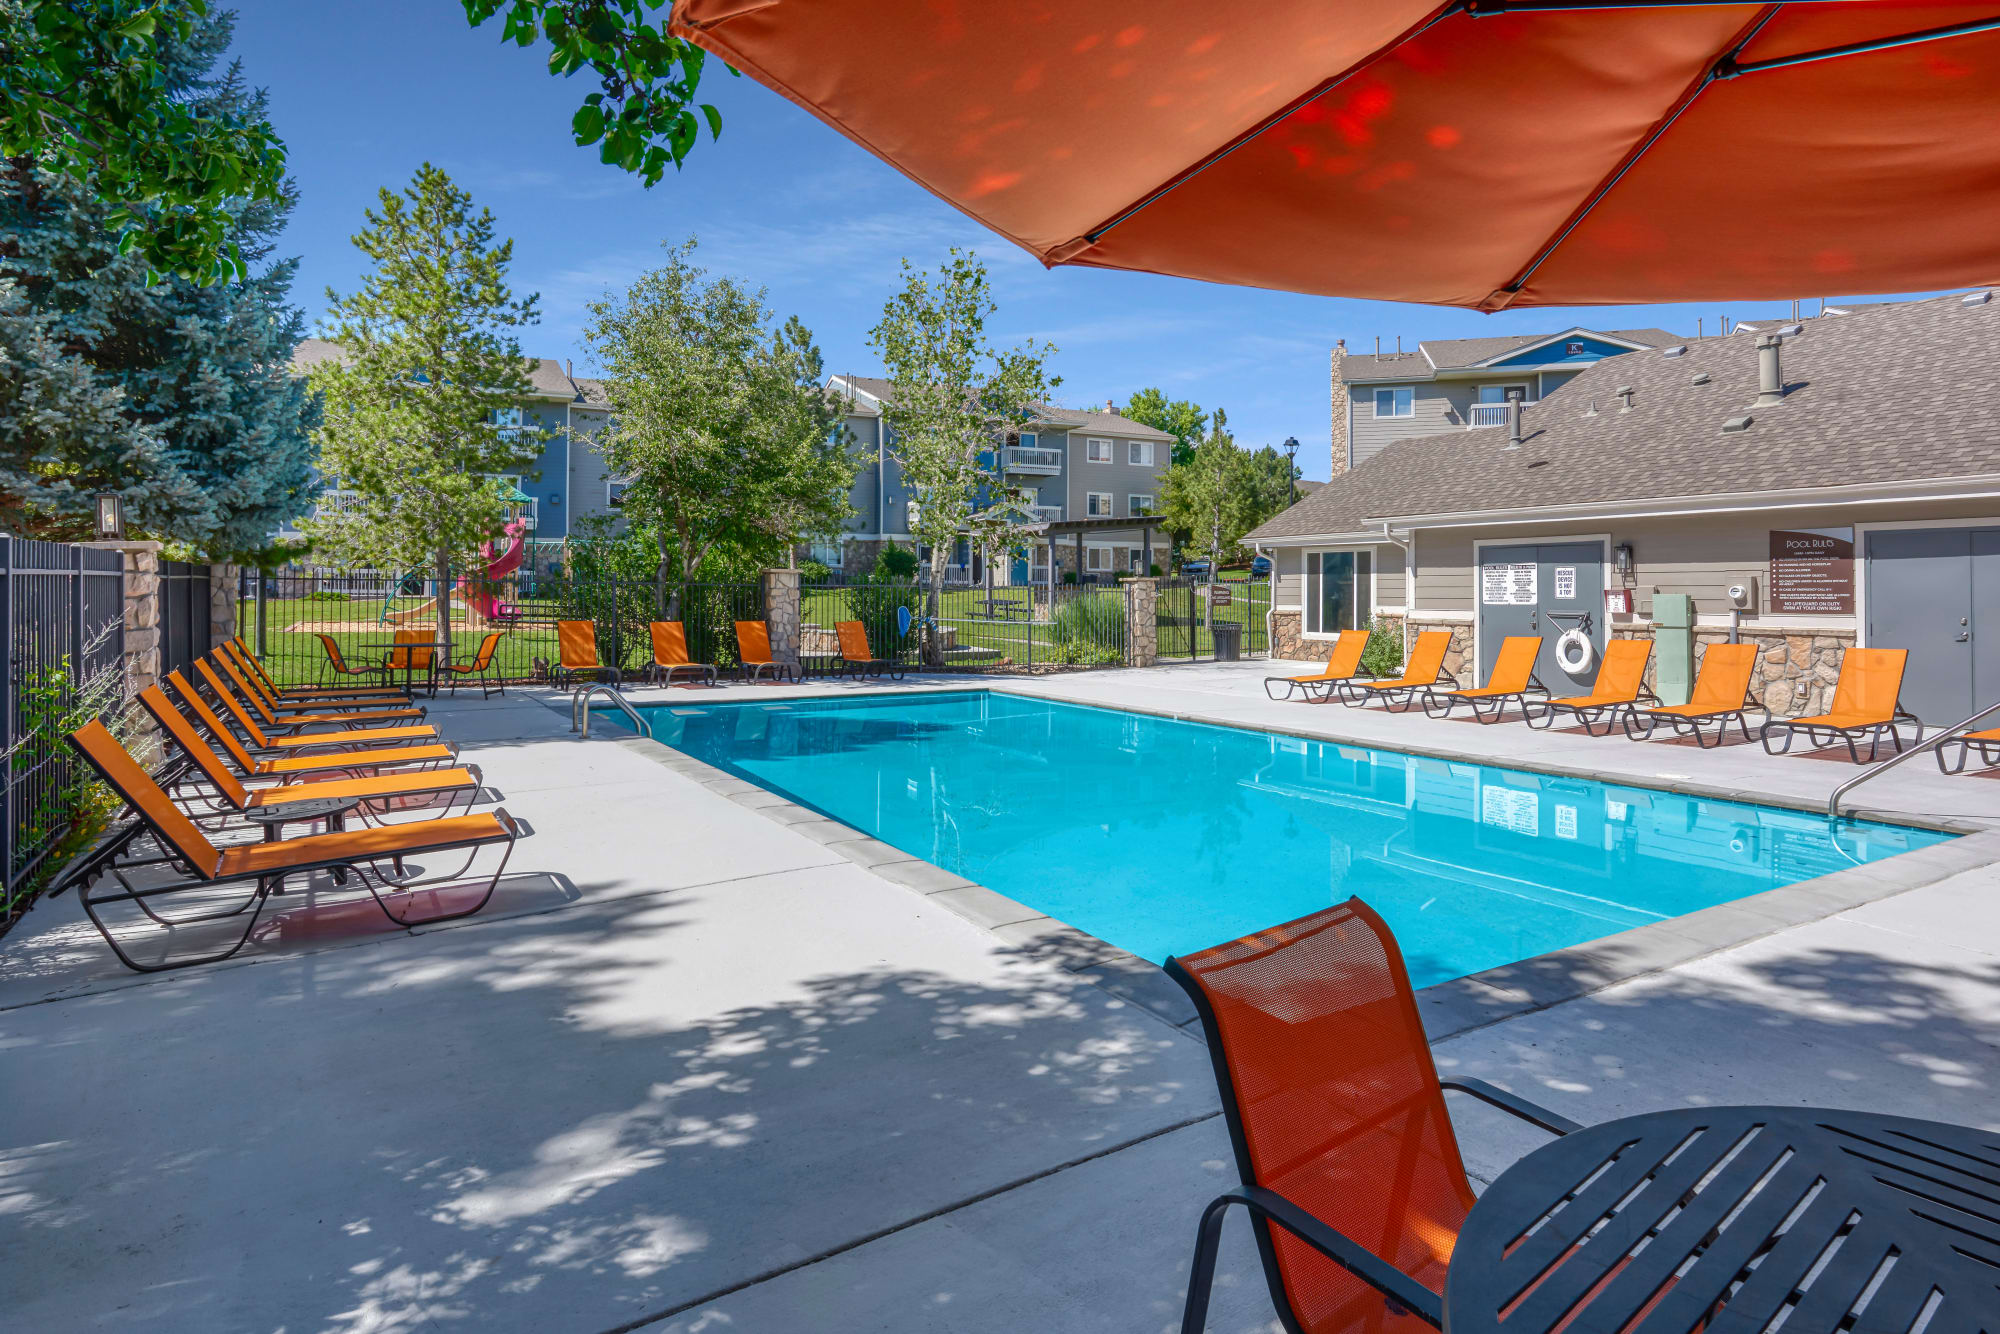 The pool surrounded by lush trees at Crossroads at City Center Apartments in Aurora, Colorado